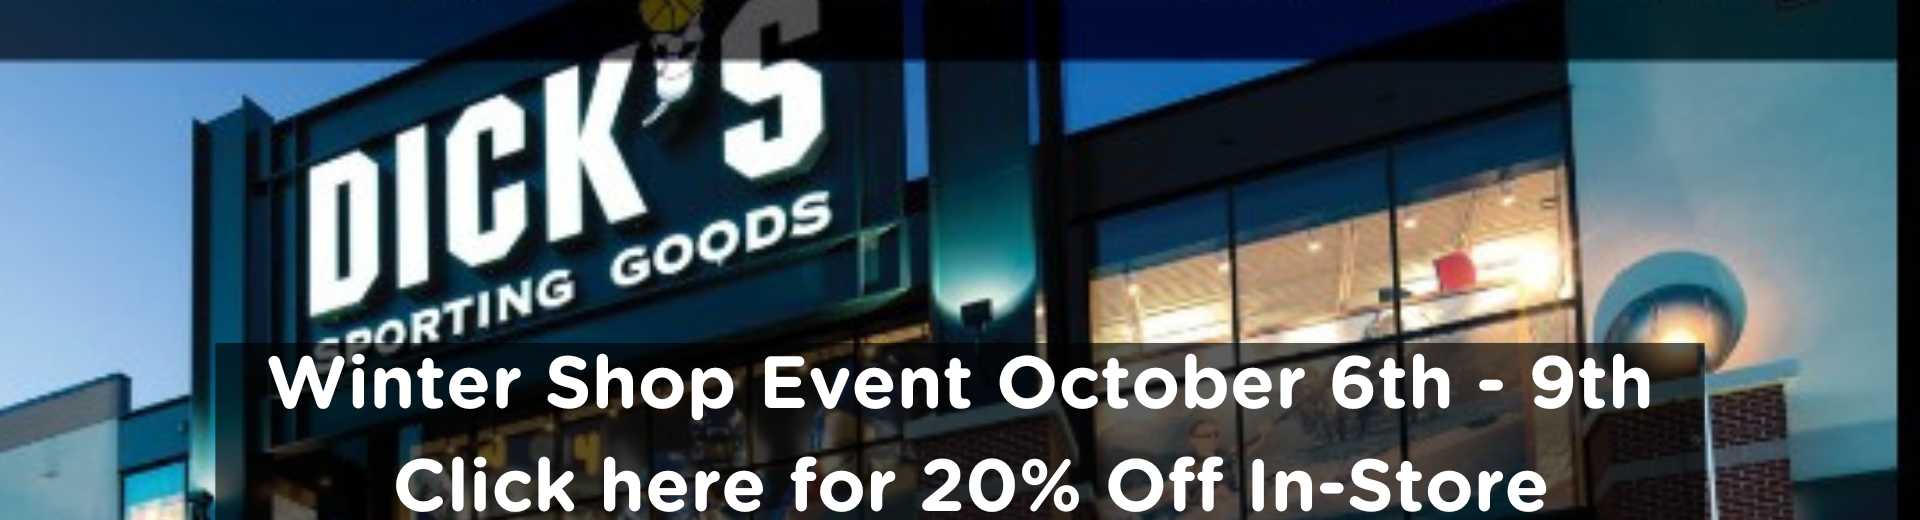 Dick's Sporting Goods Shop Days 